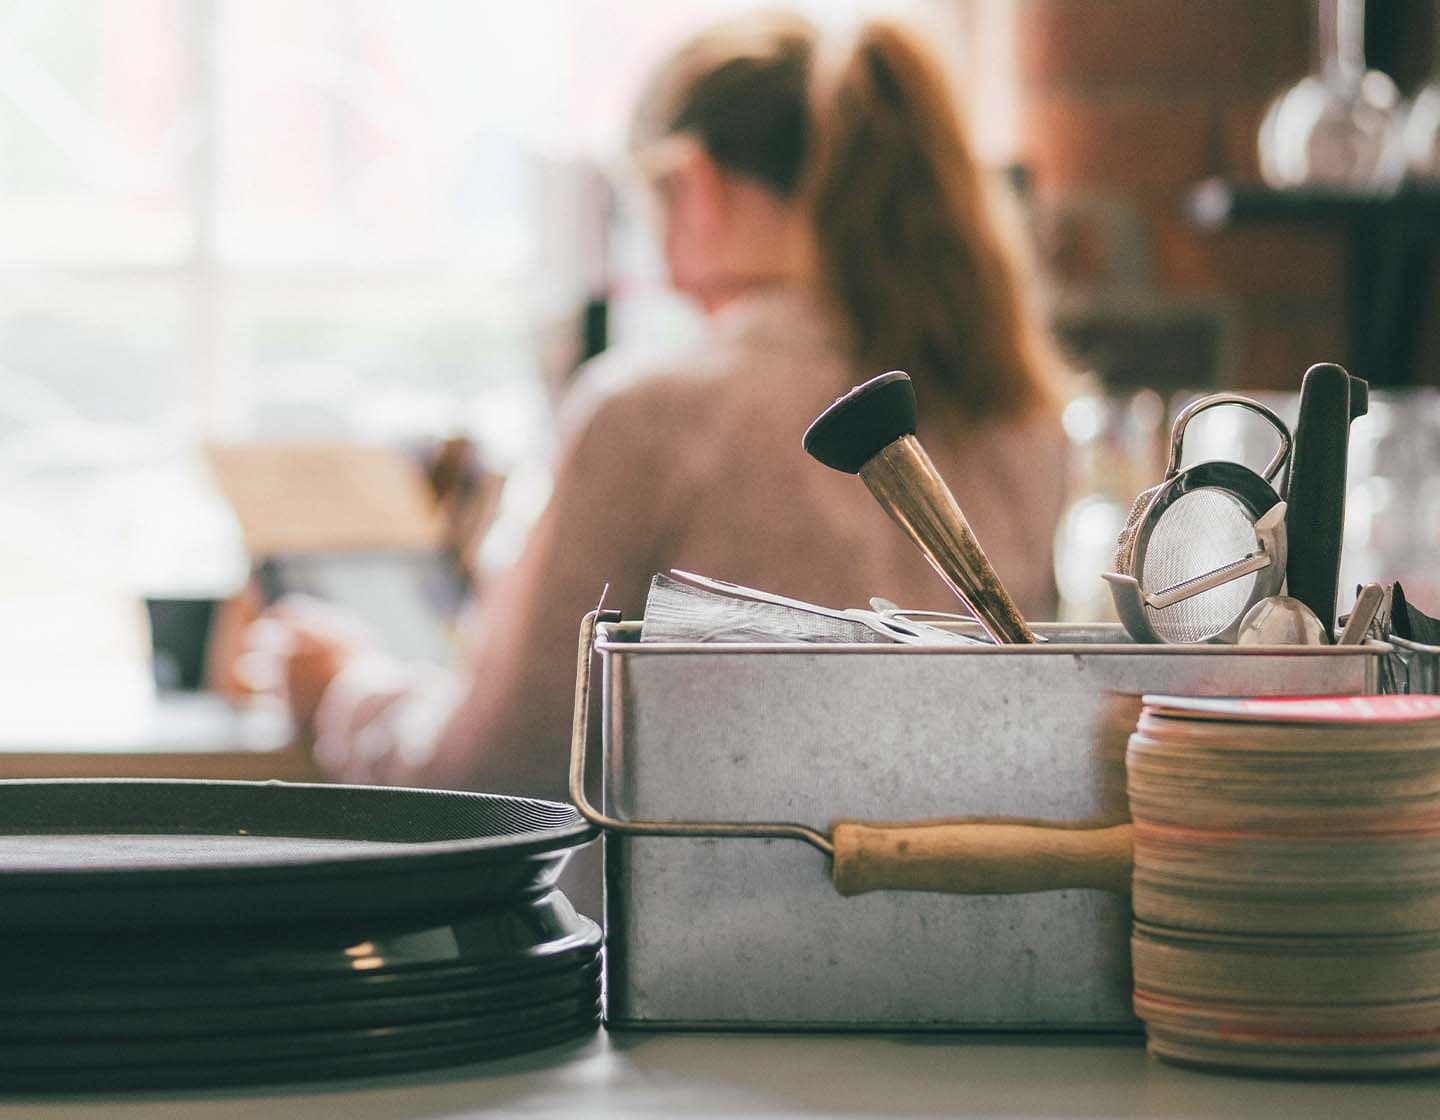 Muddling tools on a countertop, with a woman with her back turned in the background.  